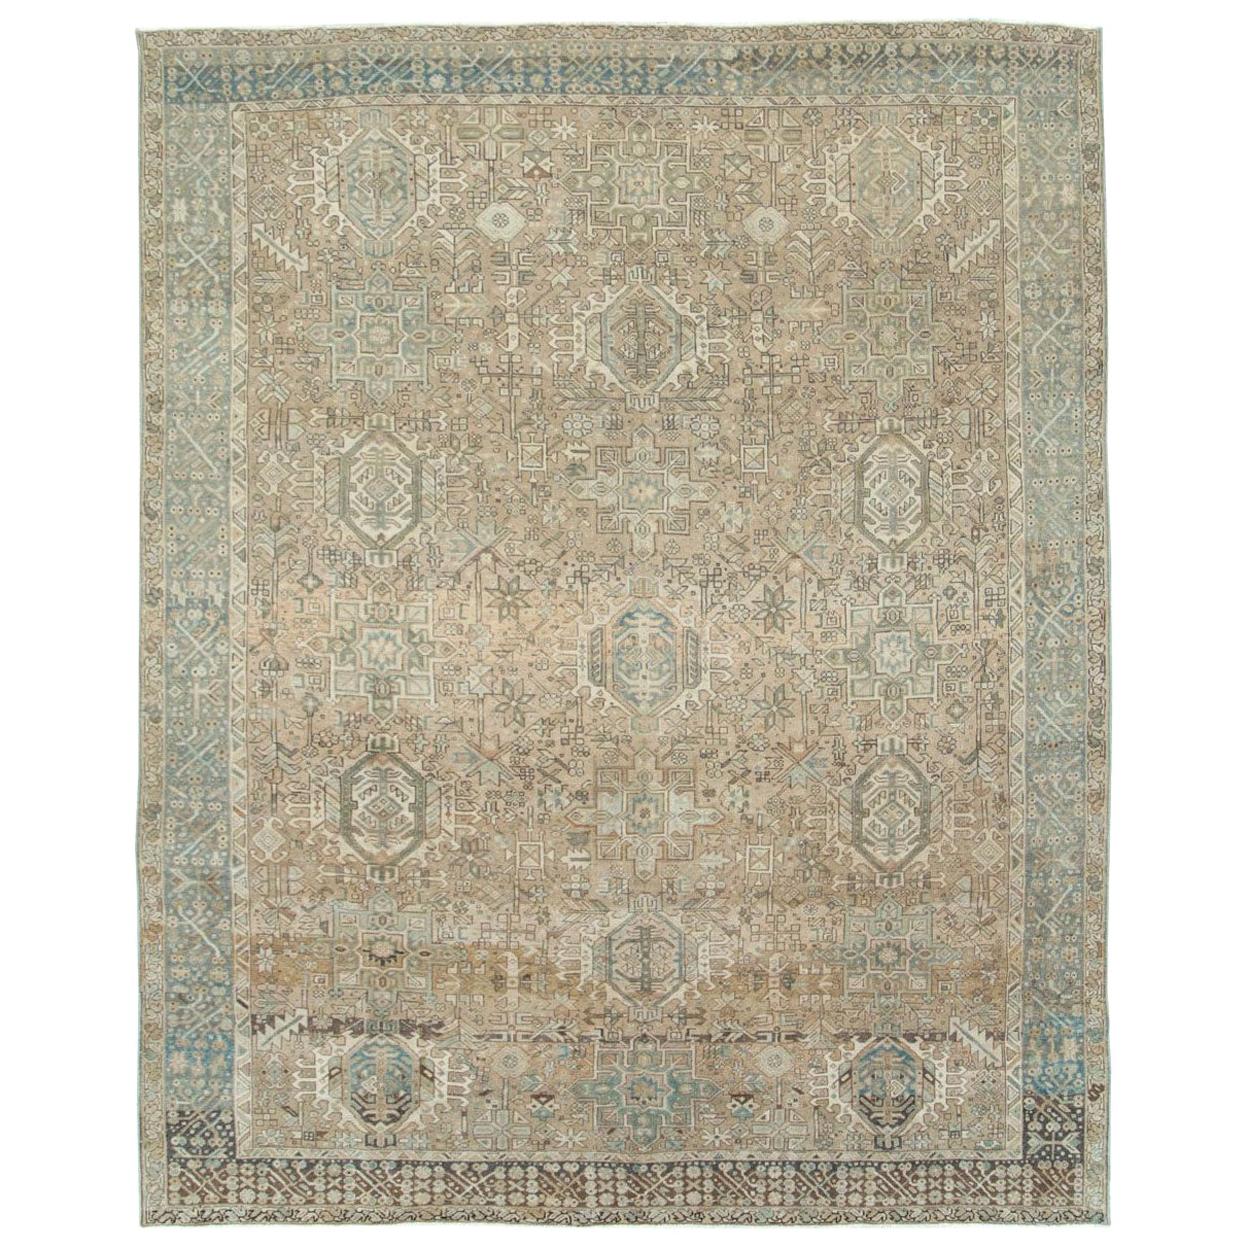 Mid-20th Century Handmade Persian Karajeh Room Size Carpet in Grey and Brown